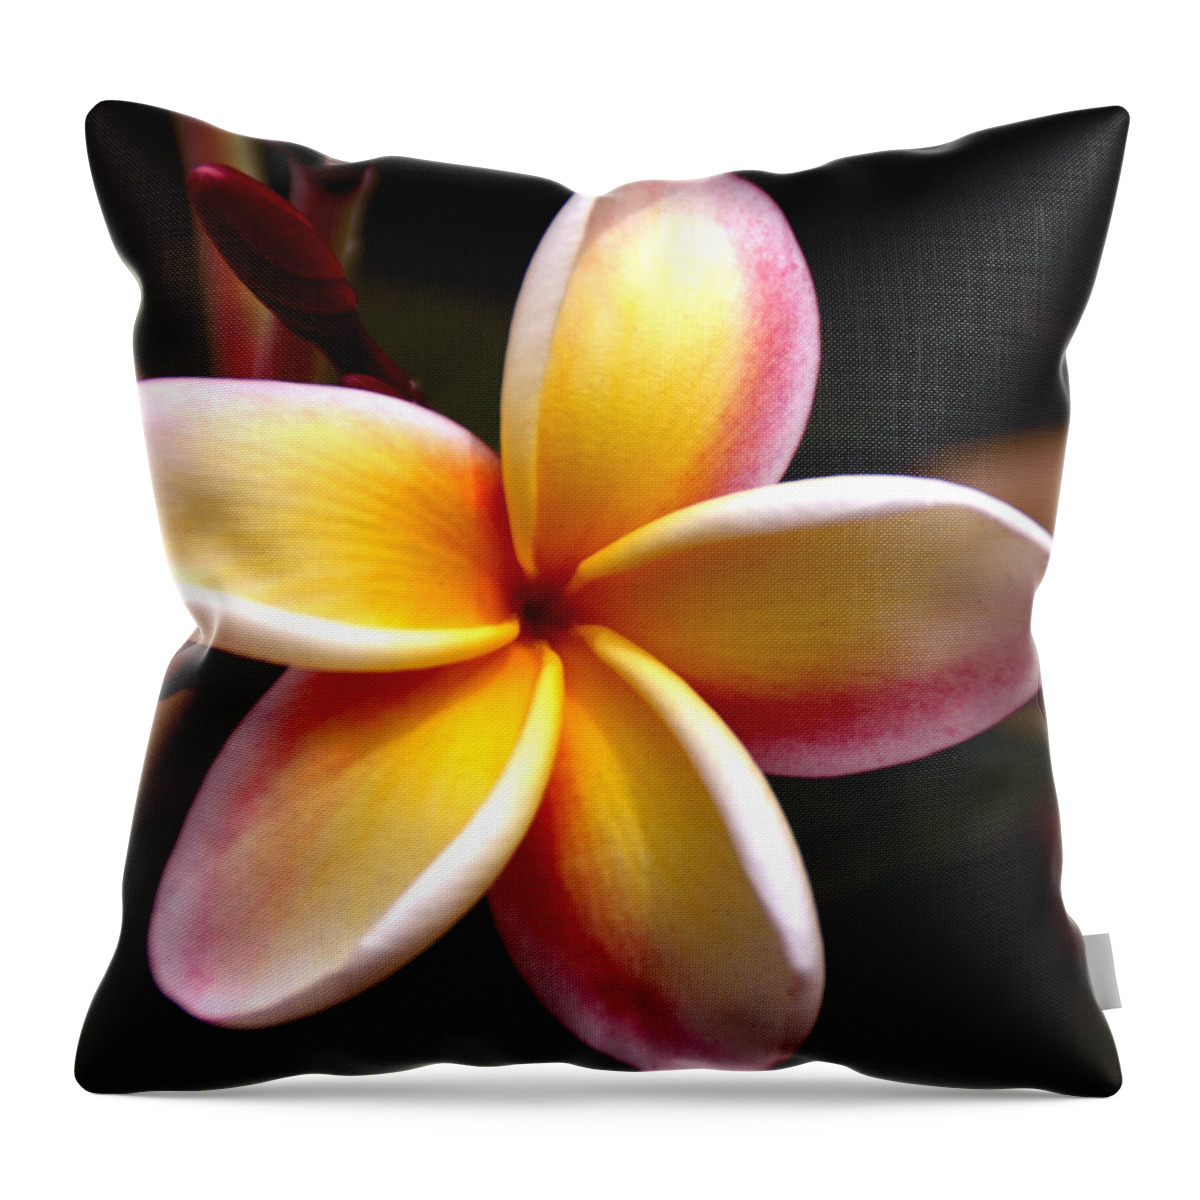 Still Life Throw Pillow featuring the photograph Pink and Yellow Plumeria by Brian Harig